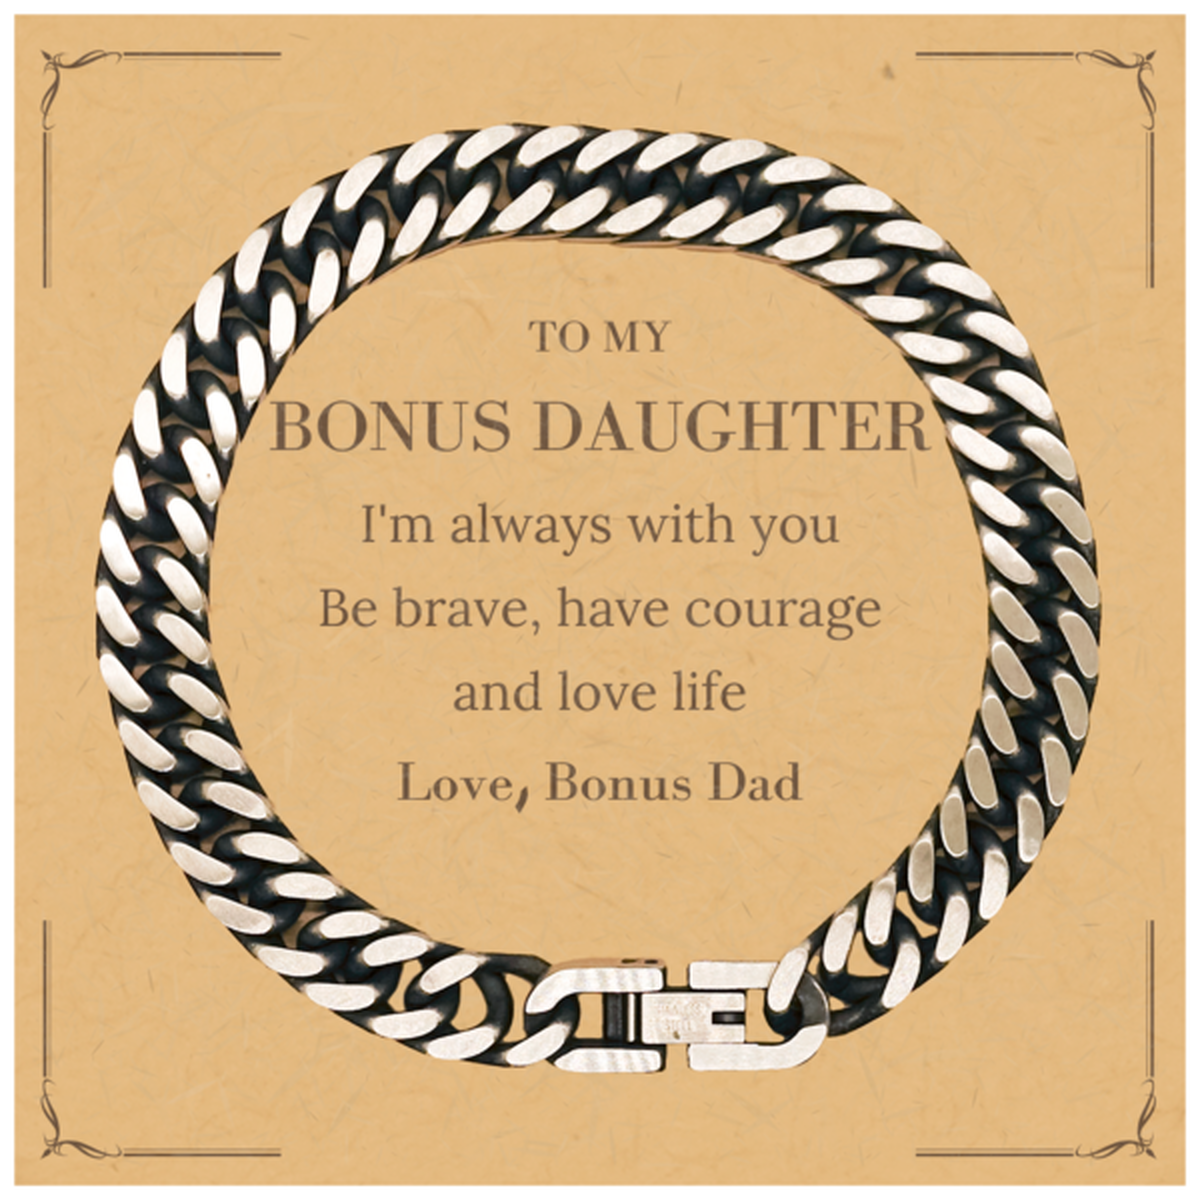 To My Bonus Daughter Gifts from Bonus Dad, Unique Cuban Link Chain Bracelet Inspirational Christmas Birthday Graduation Gifts for Bonus Daughter I'm always with you. Be brave, have courage and love life. Love, Bonus Dad